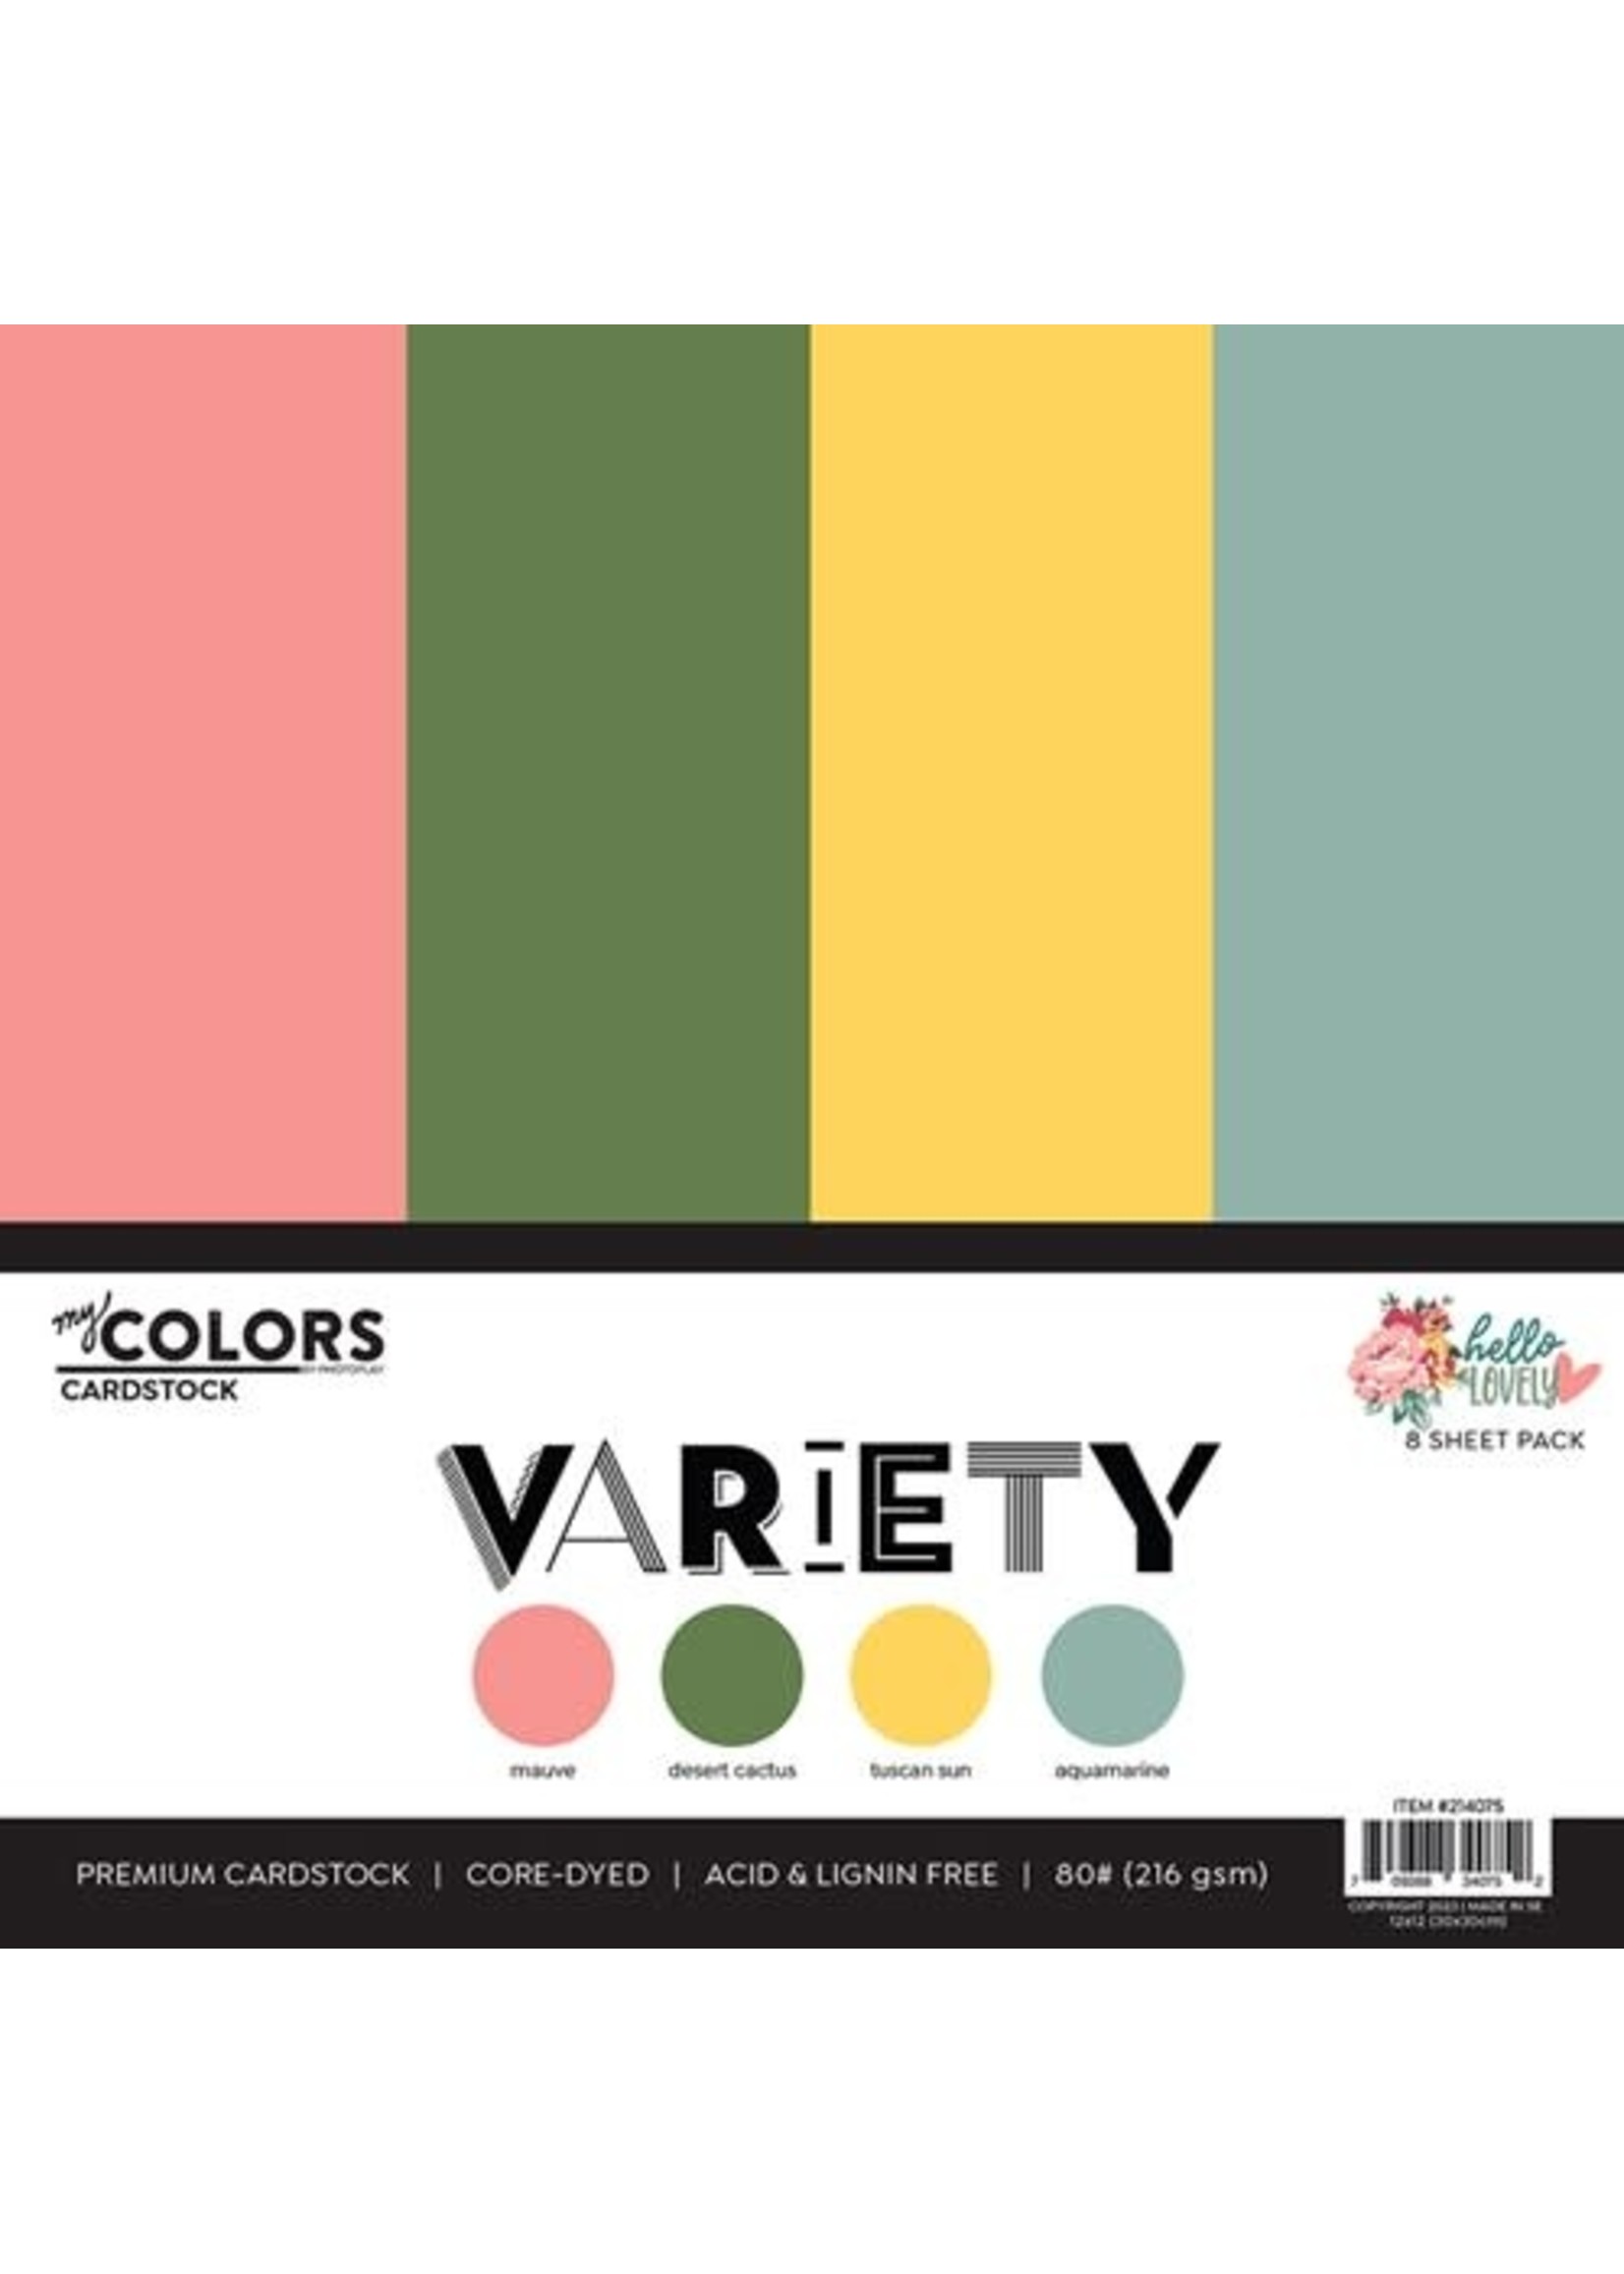 Photoplay hello Lovely: Cardstock Variety